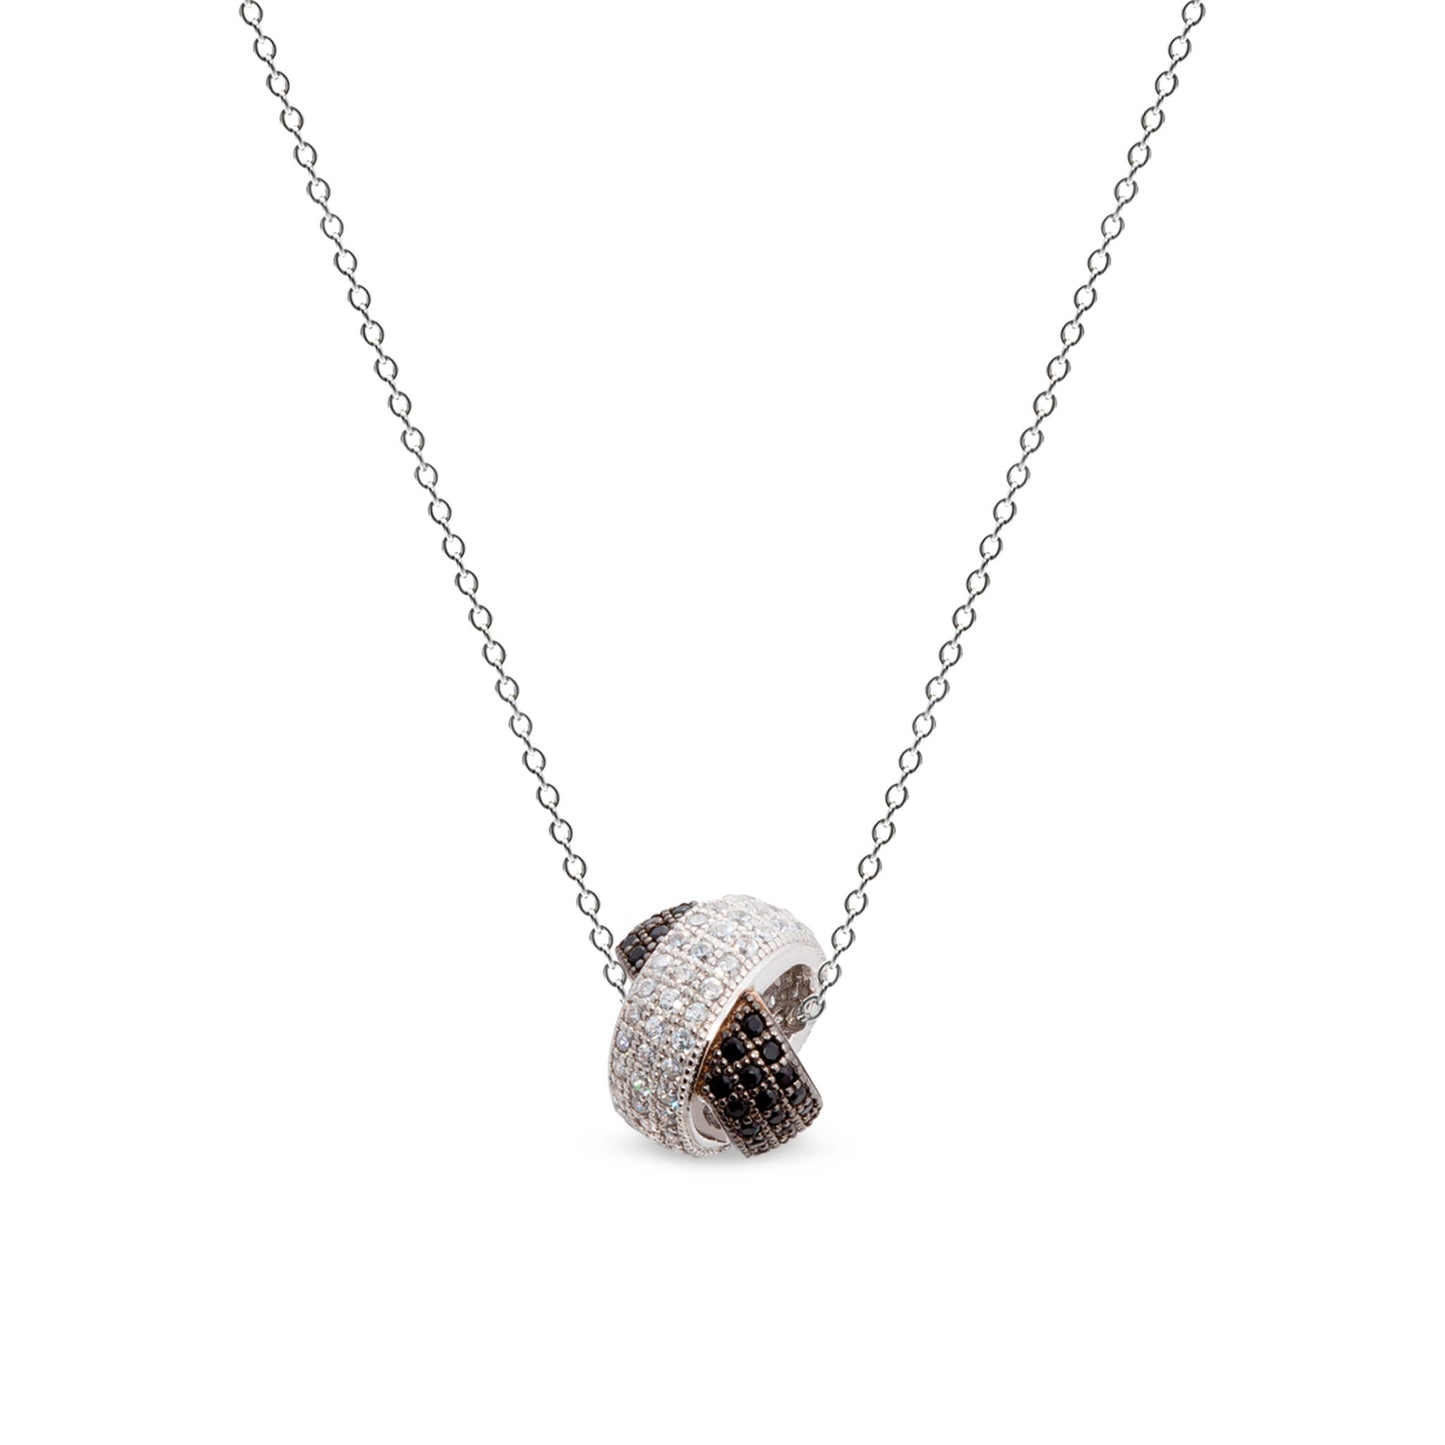 A platinum & black sterling silver kiss pendant with simulated diamonds displayed on a neutral white background.